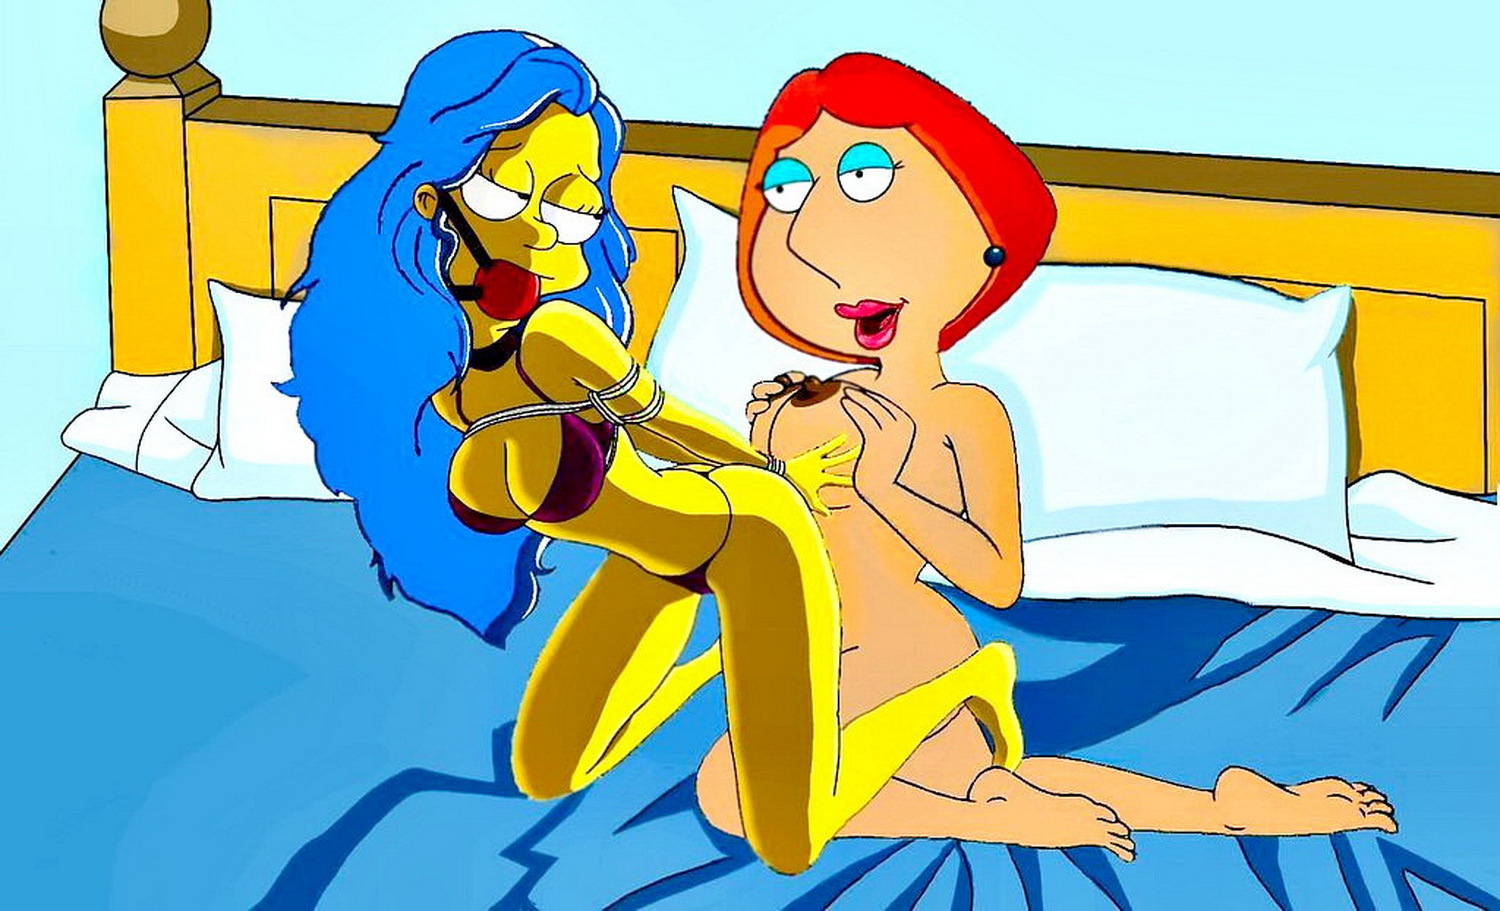 Erotic Lois Griffin and Marge Simpson in Your Cartoon Porn gallery. 